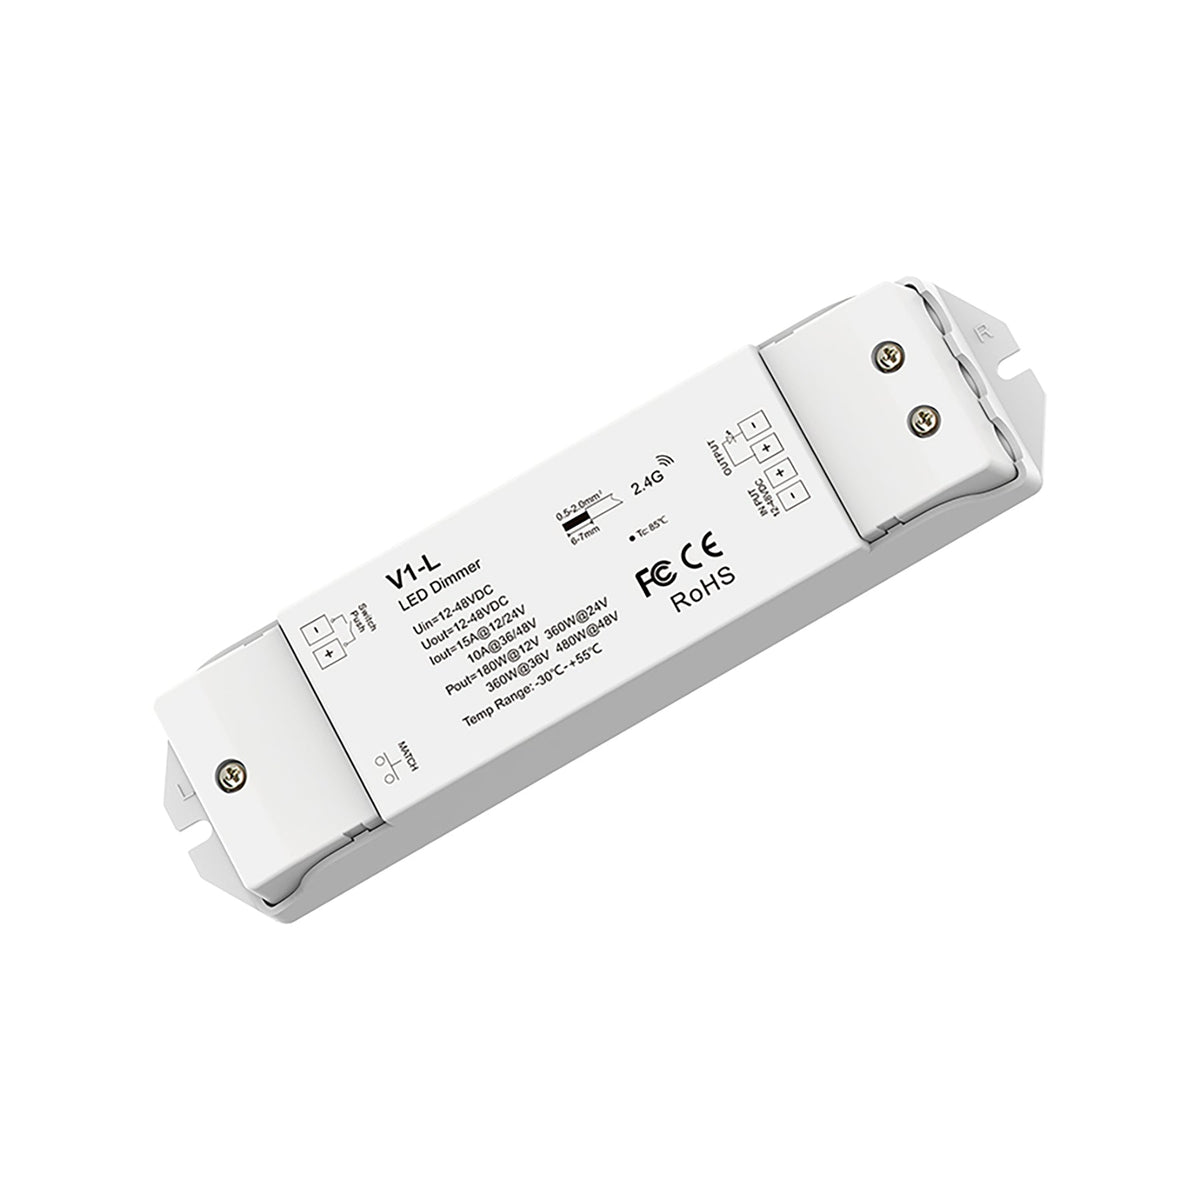 G.W.S. LED LED 12-48V DC Dimming Controller V1-L + 1 Zone Panel Remote Control 1*CR2032 Battery TW1